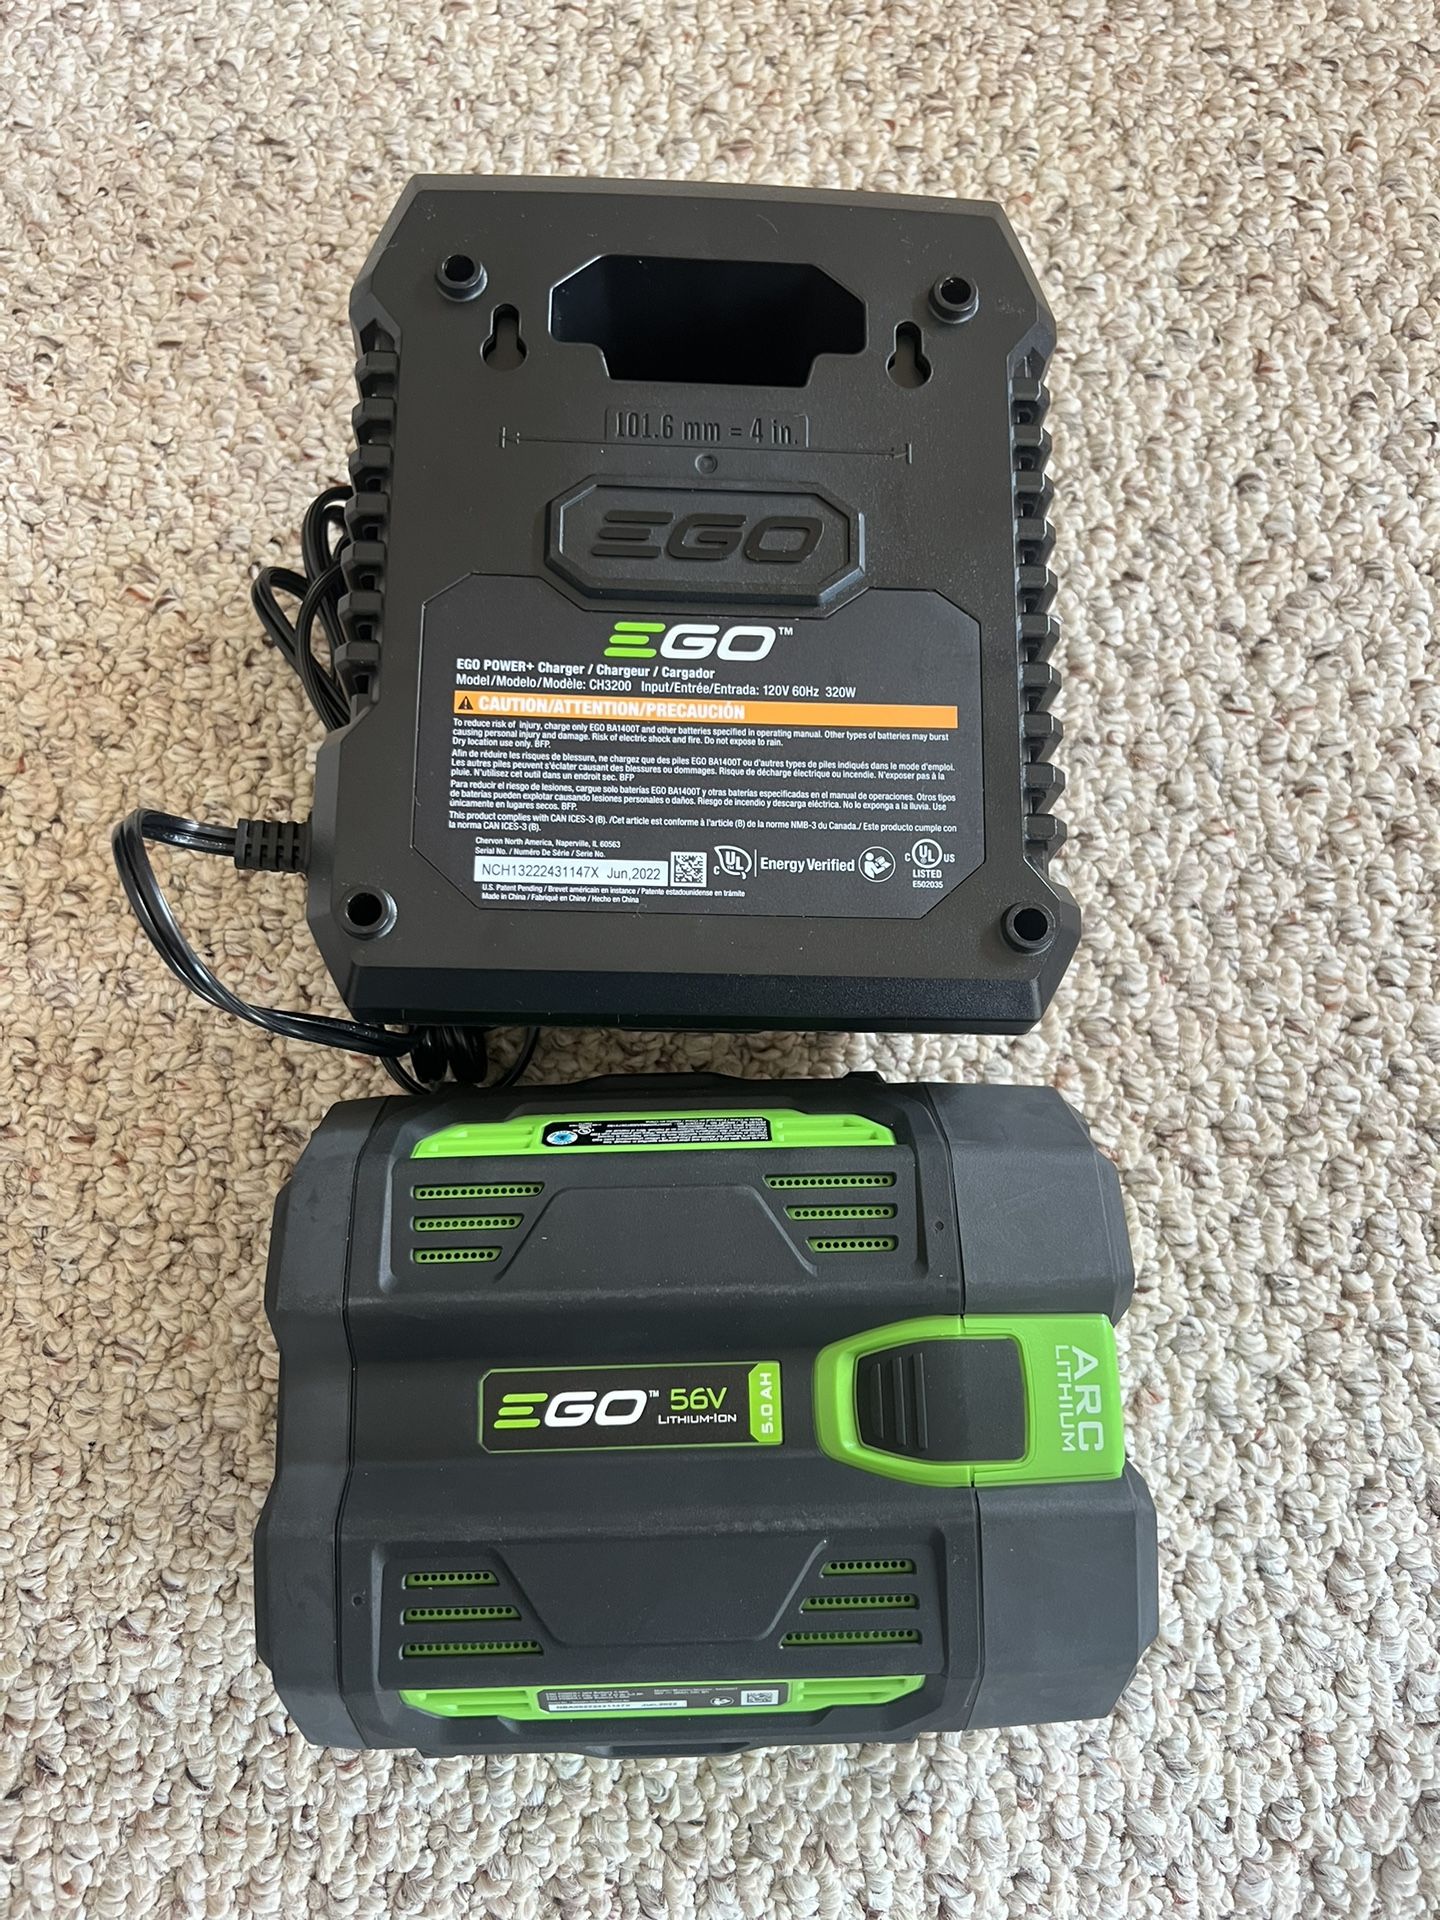 EGO 56V 5.0Ah Battery And Charger (New)